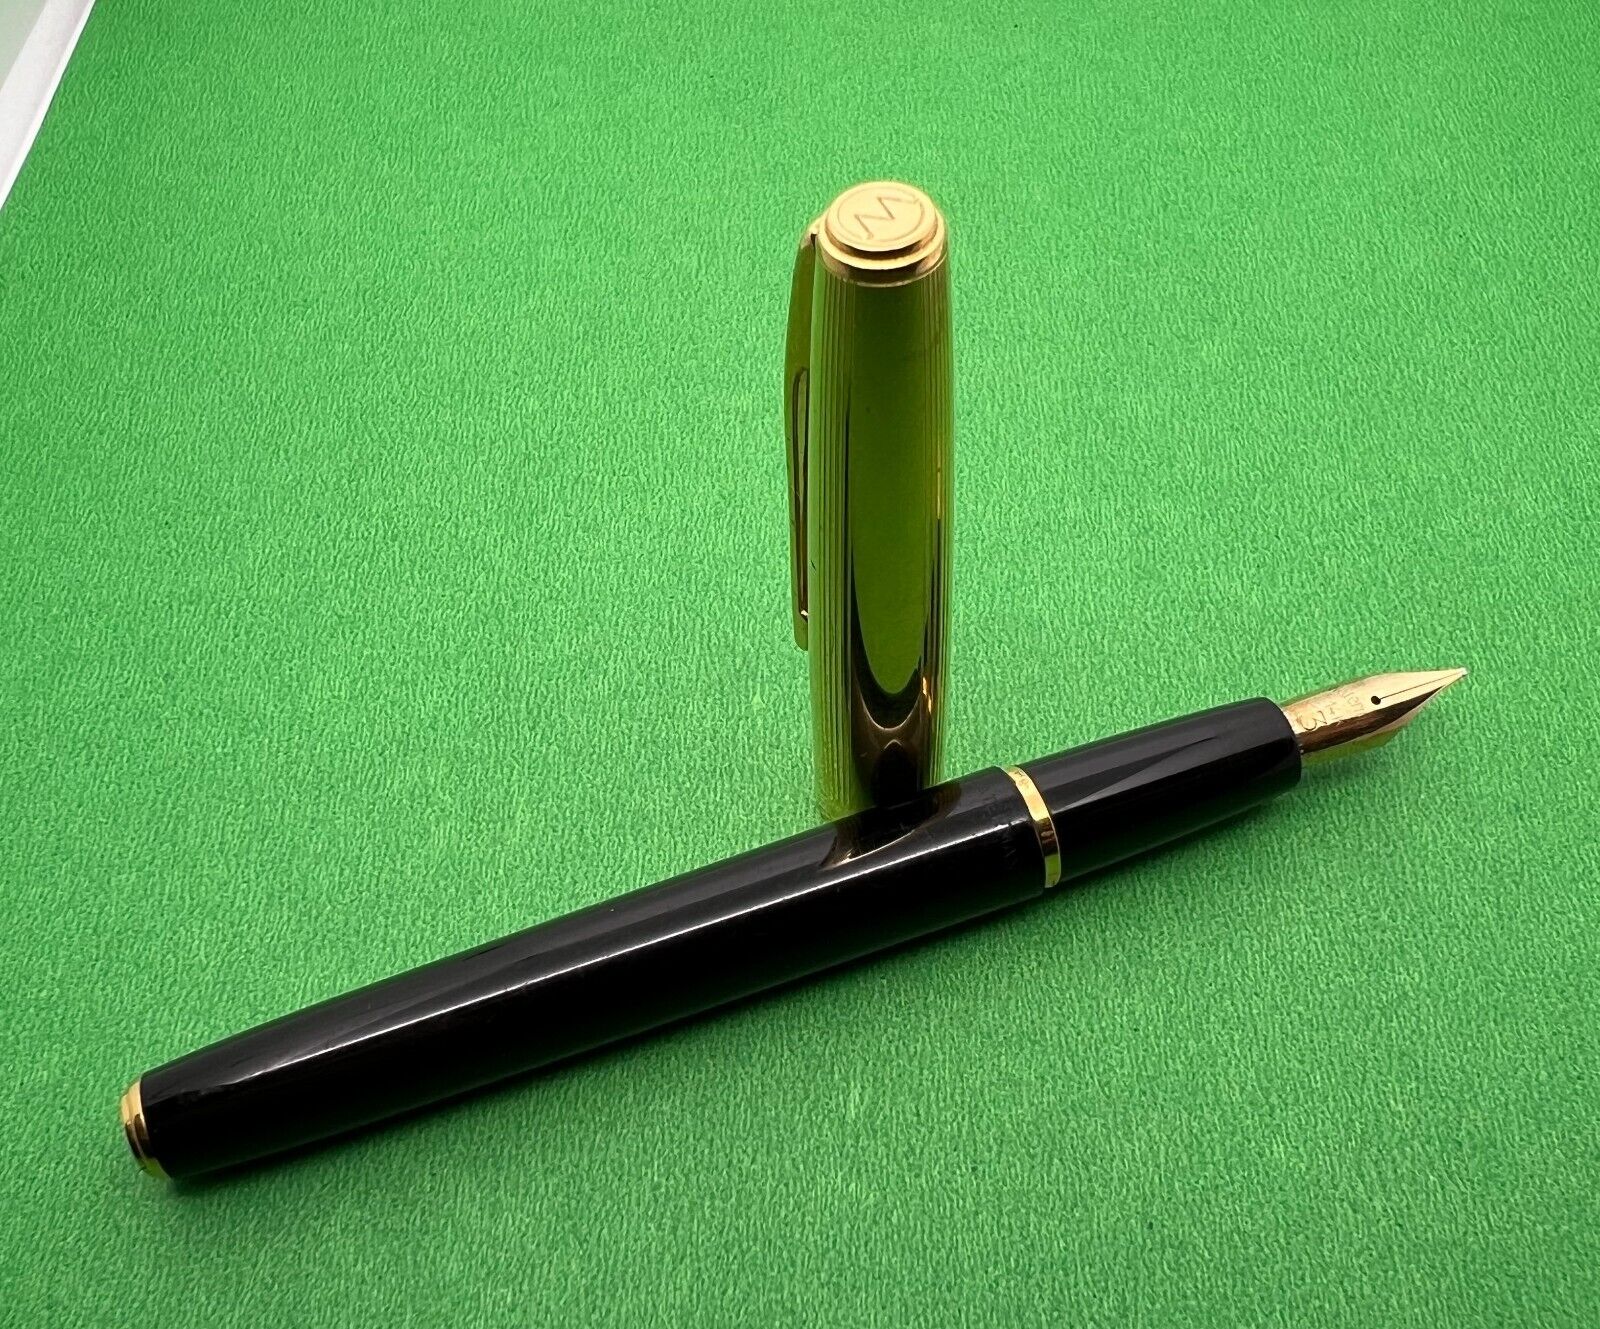 VINTAGE WATERMAN 3 FOUNTAIN PEN 14K GOLD PLATED